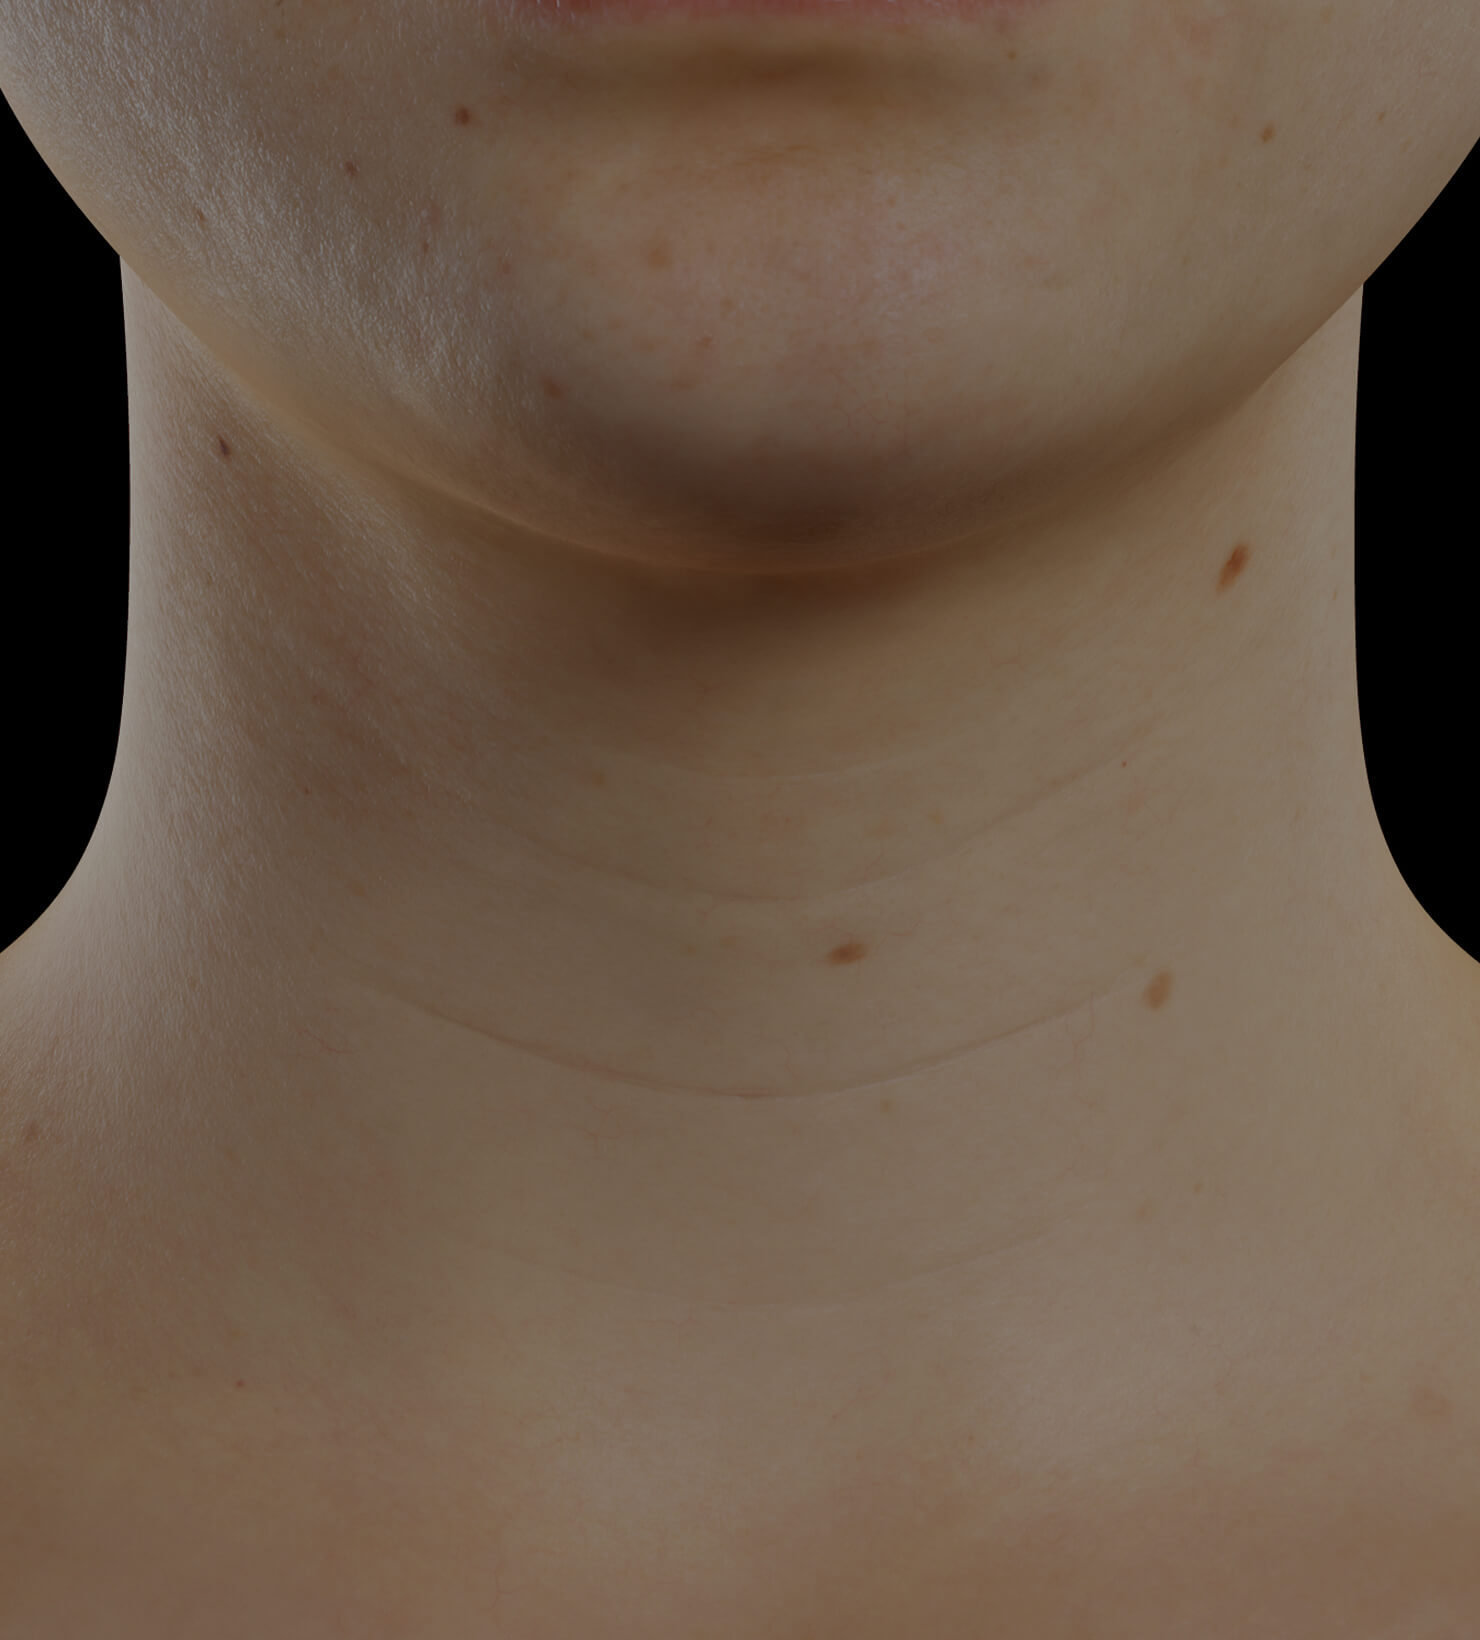 Clinique Chloé female patient with neck skin laxity treated with Skinboosters injections for neck skin tightening